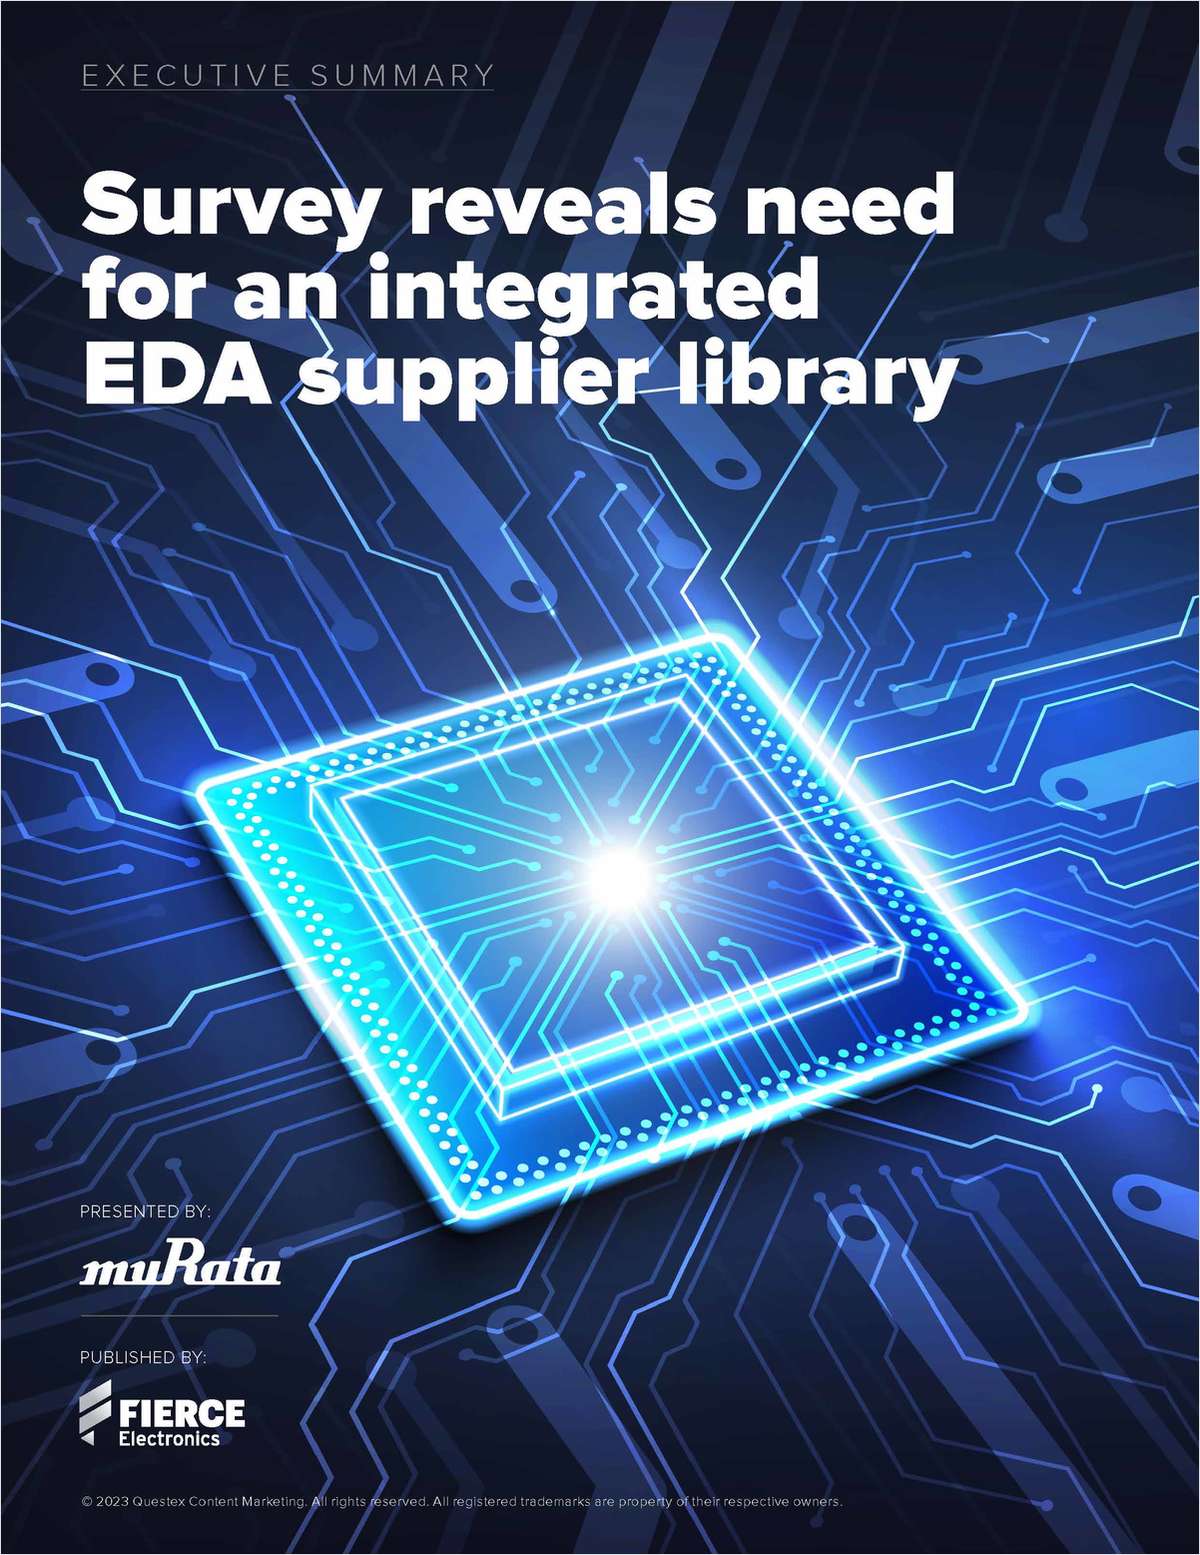 Executive Summary: Survey reveals need for an integrated EDA supplier library